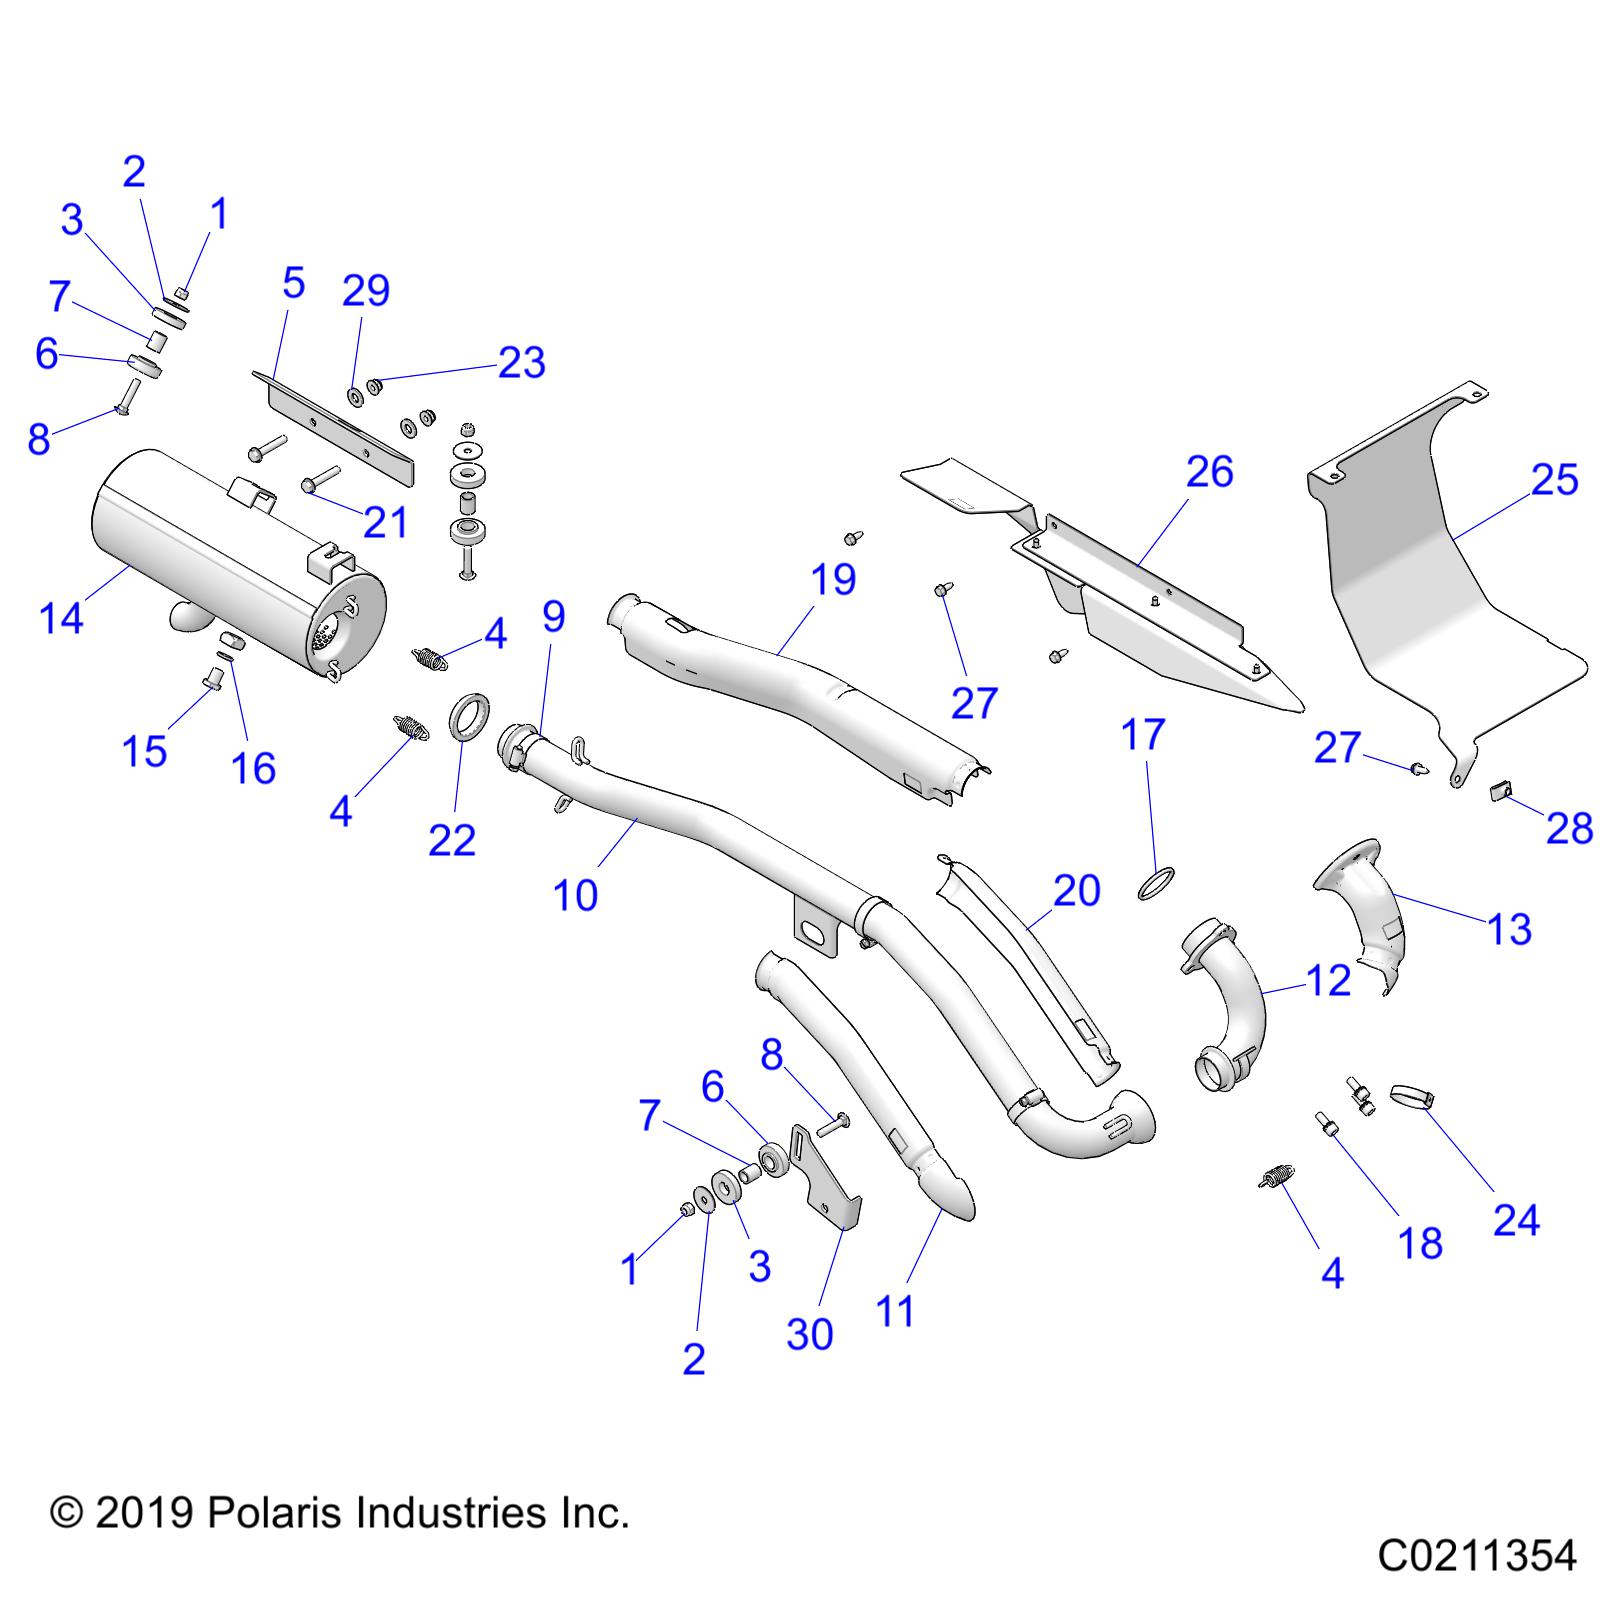 Part Number : 1263099 MANIFOLD WELD